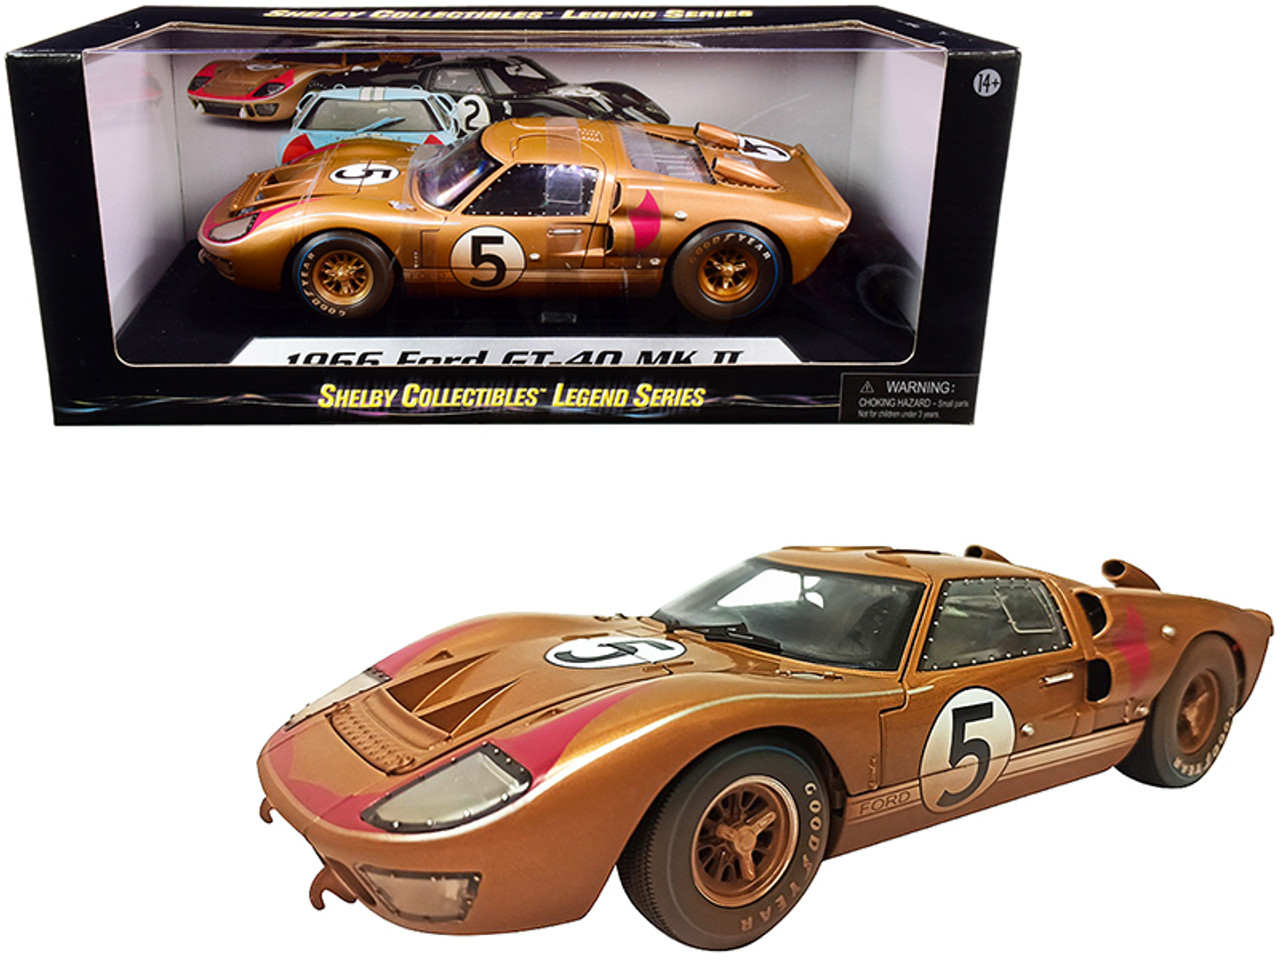 1966 FORD GT-40 MK II #1 W/DIRT 1/18 SCALE DIECAST CAR SHELBY COLLECTIBLES SC405 